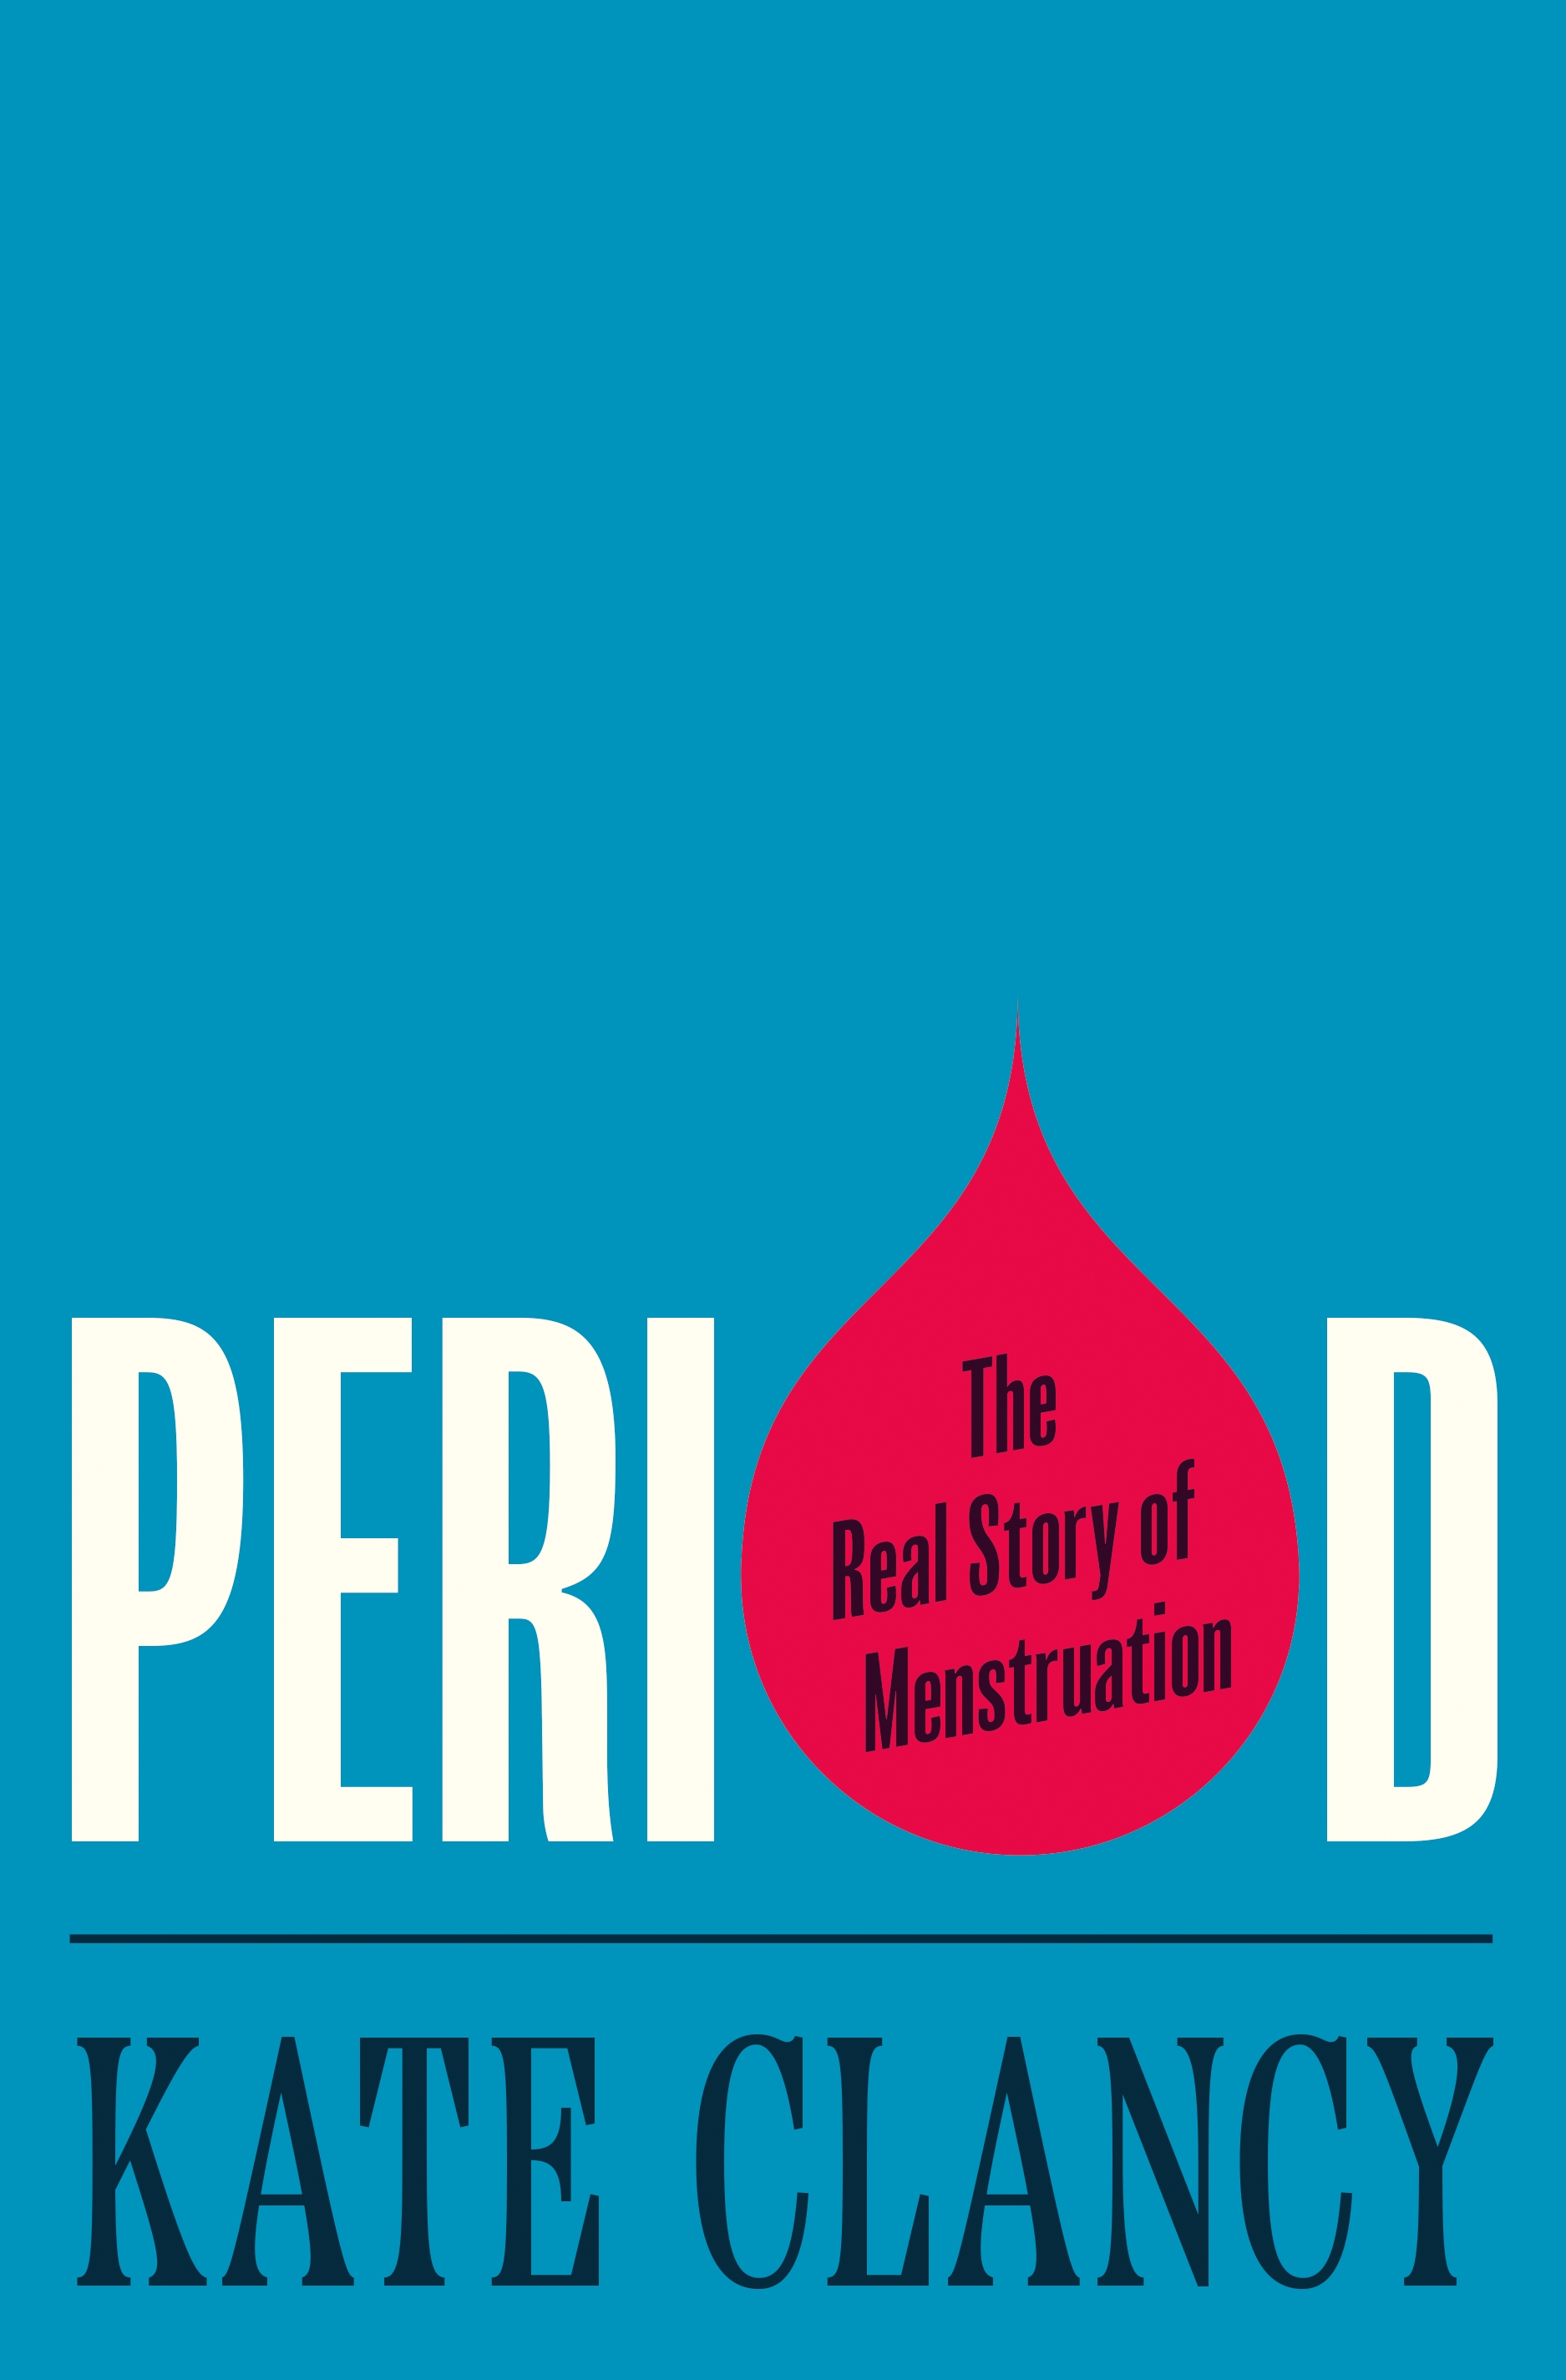 Period: The real story of menstruation